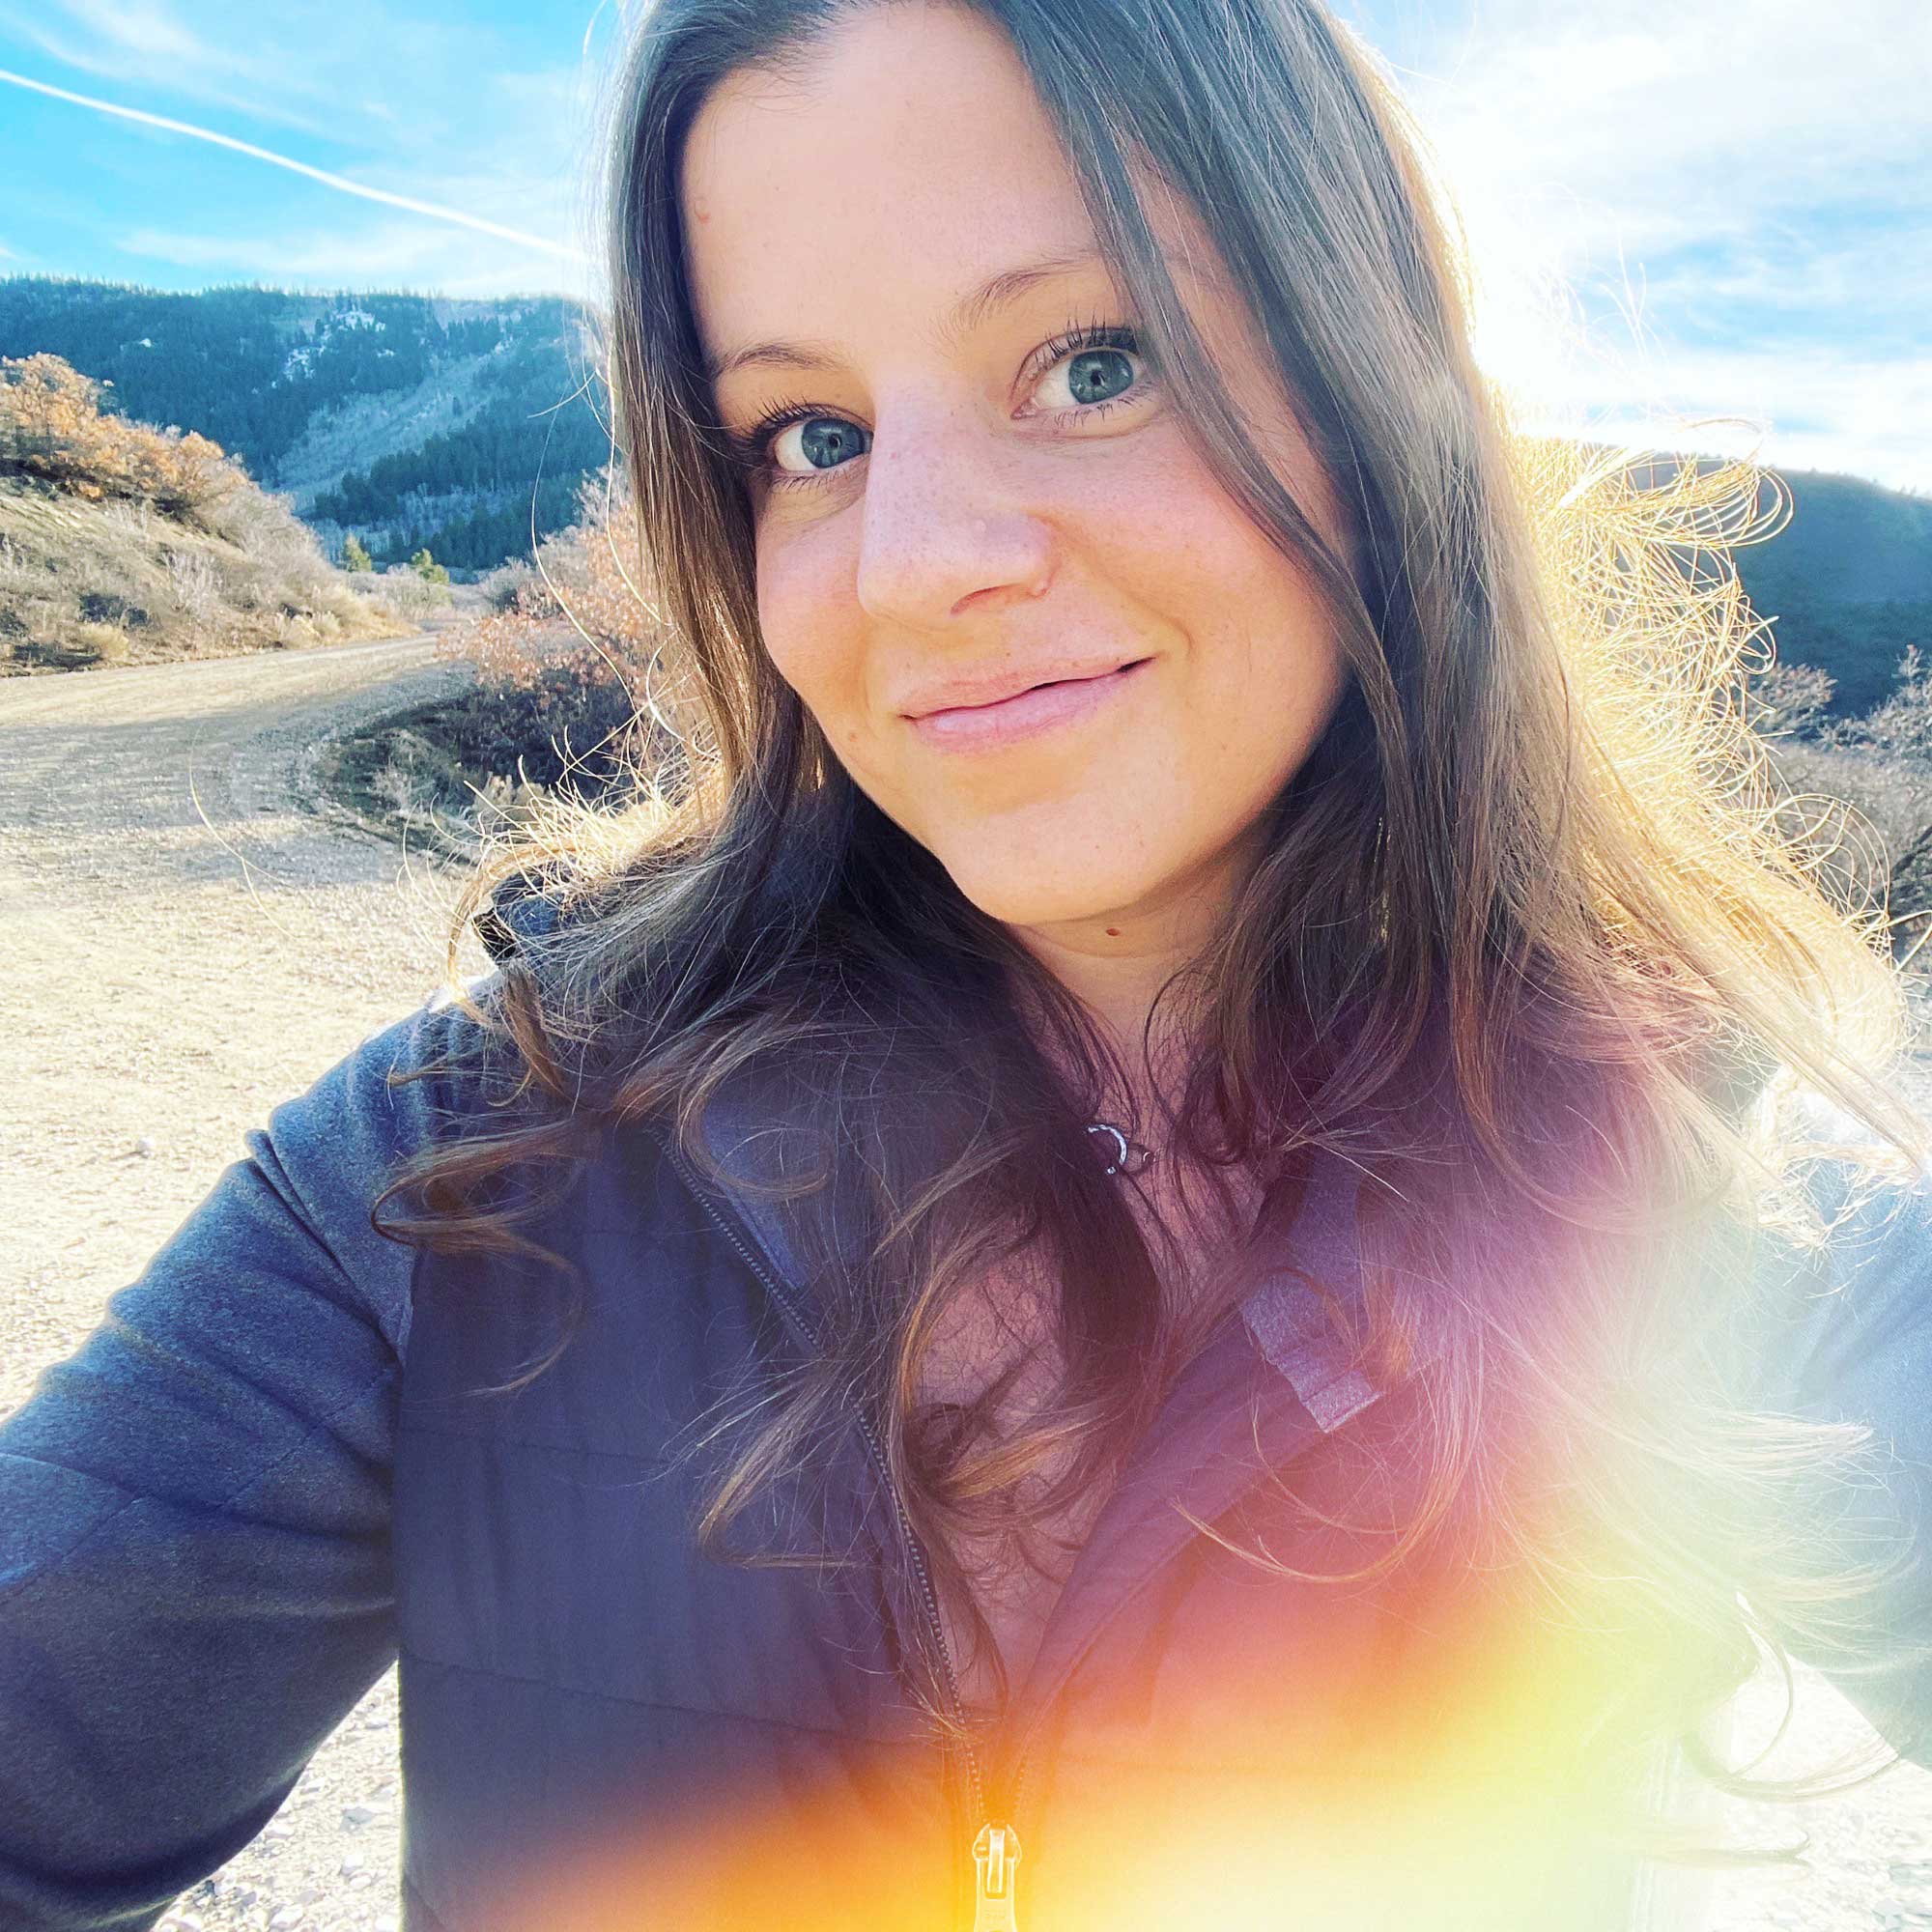 Stephenie Zamora, a 37 year old white woman with brown hair smiles in a selfie against a mountain backdrop.